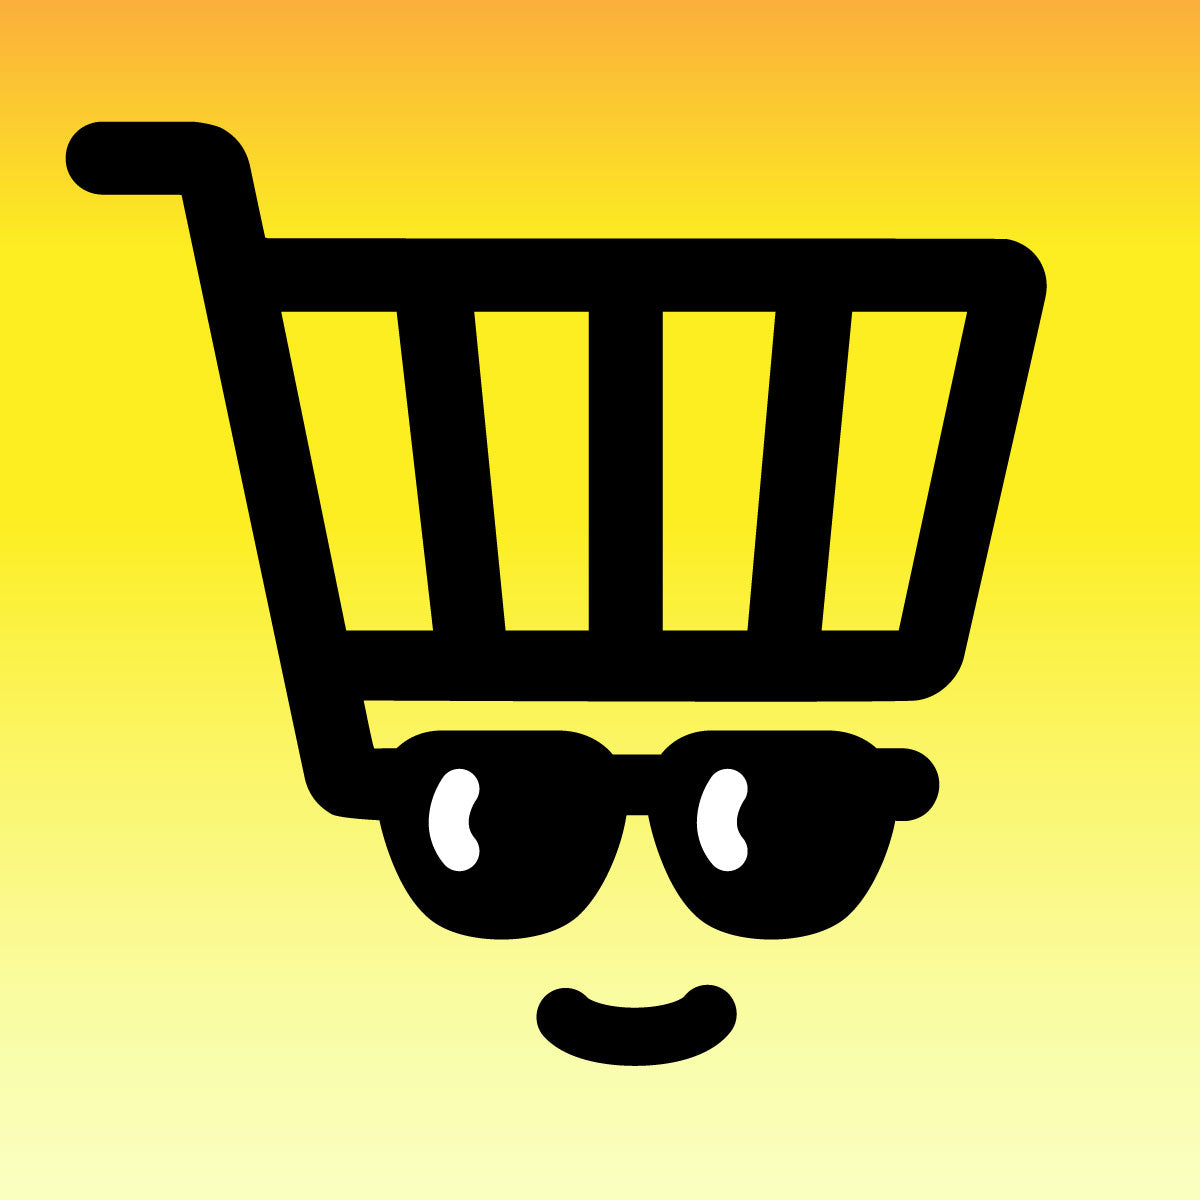 Hire Shopify Experts to integrate COOL CART â€‘ Freeâ€‘4â€‘Ever Avail app into a Shopify store